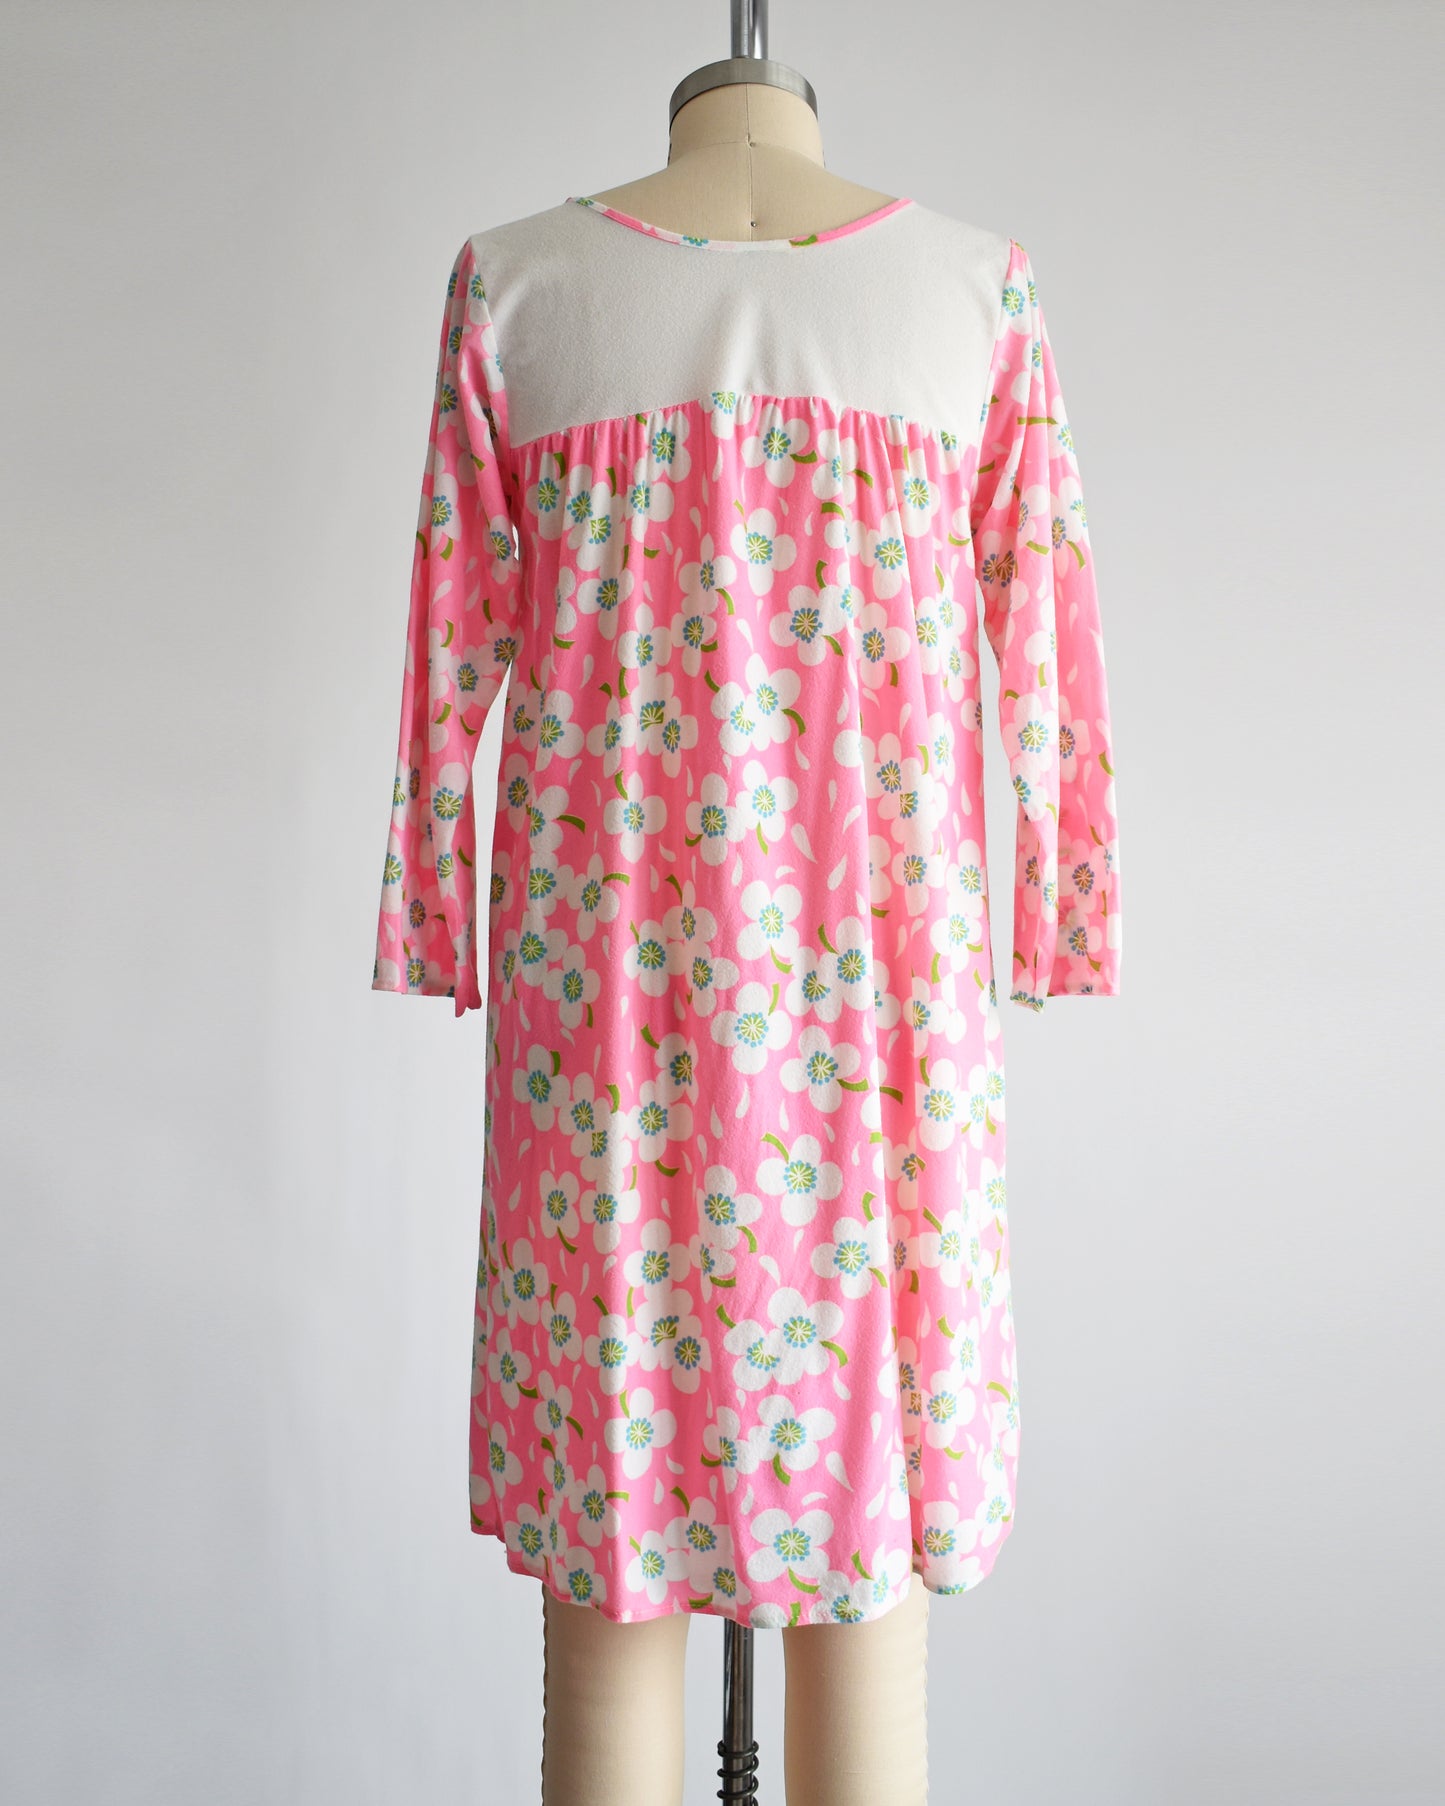 back view of a vintage 1970s pink flower power nightgown